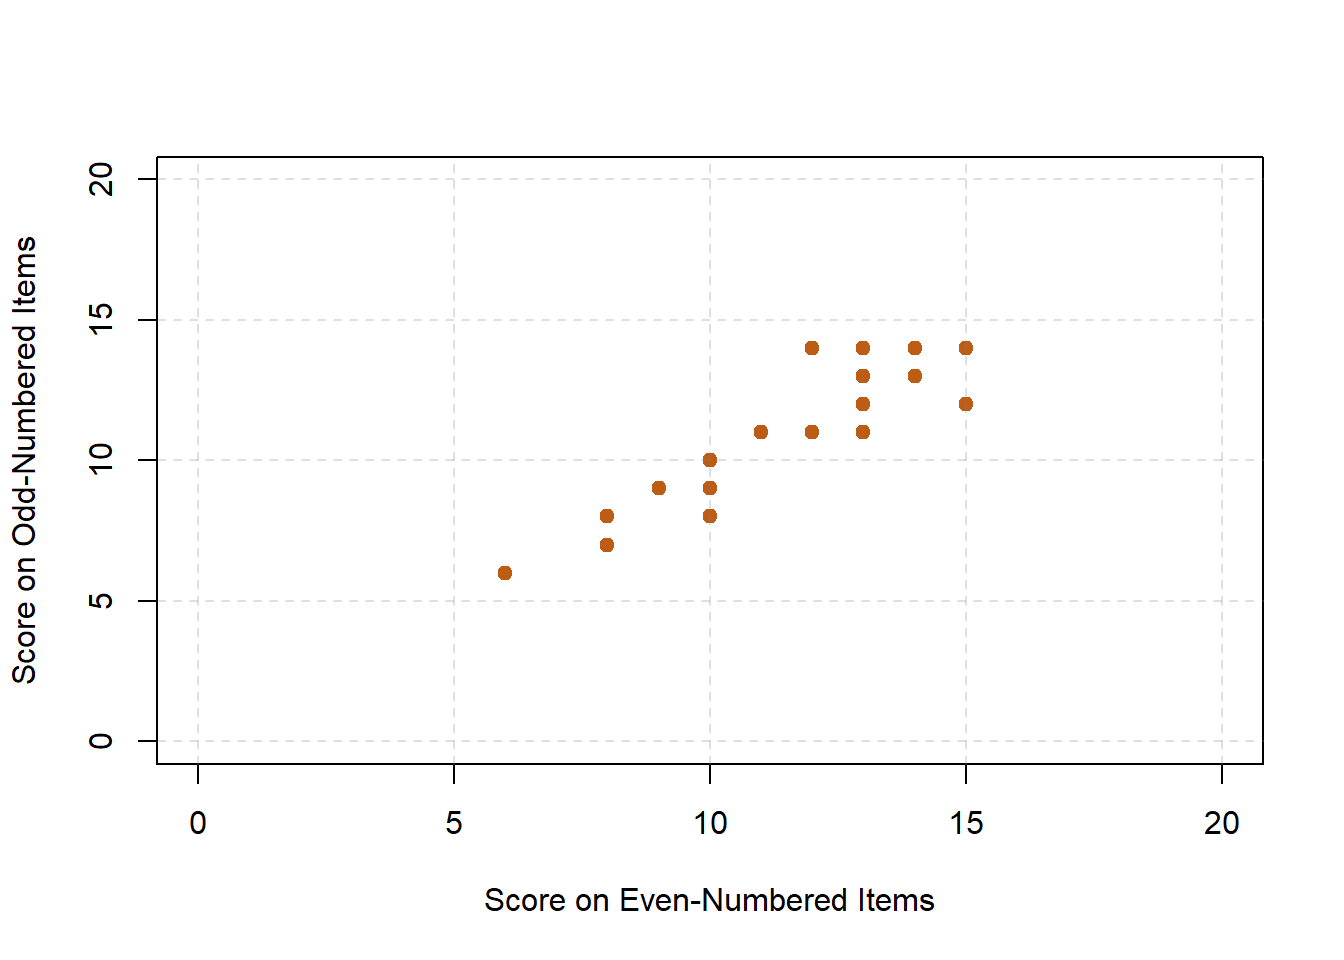 Split-half correlation between several college students’ scores on the even-numbered items and their scores on the odd-numbered items of the Rosenberg self-esteem scale.